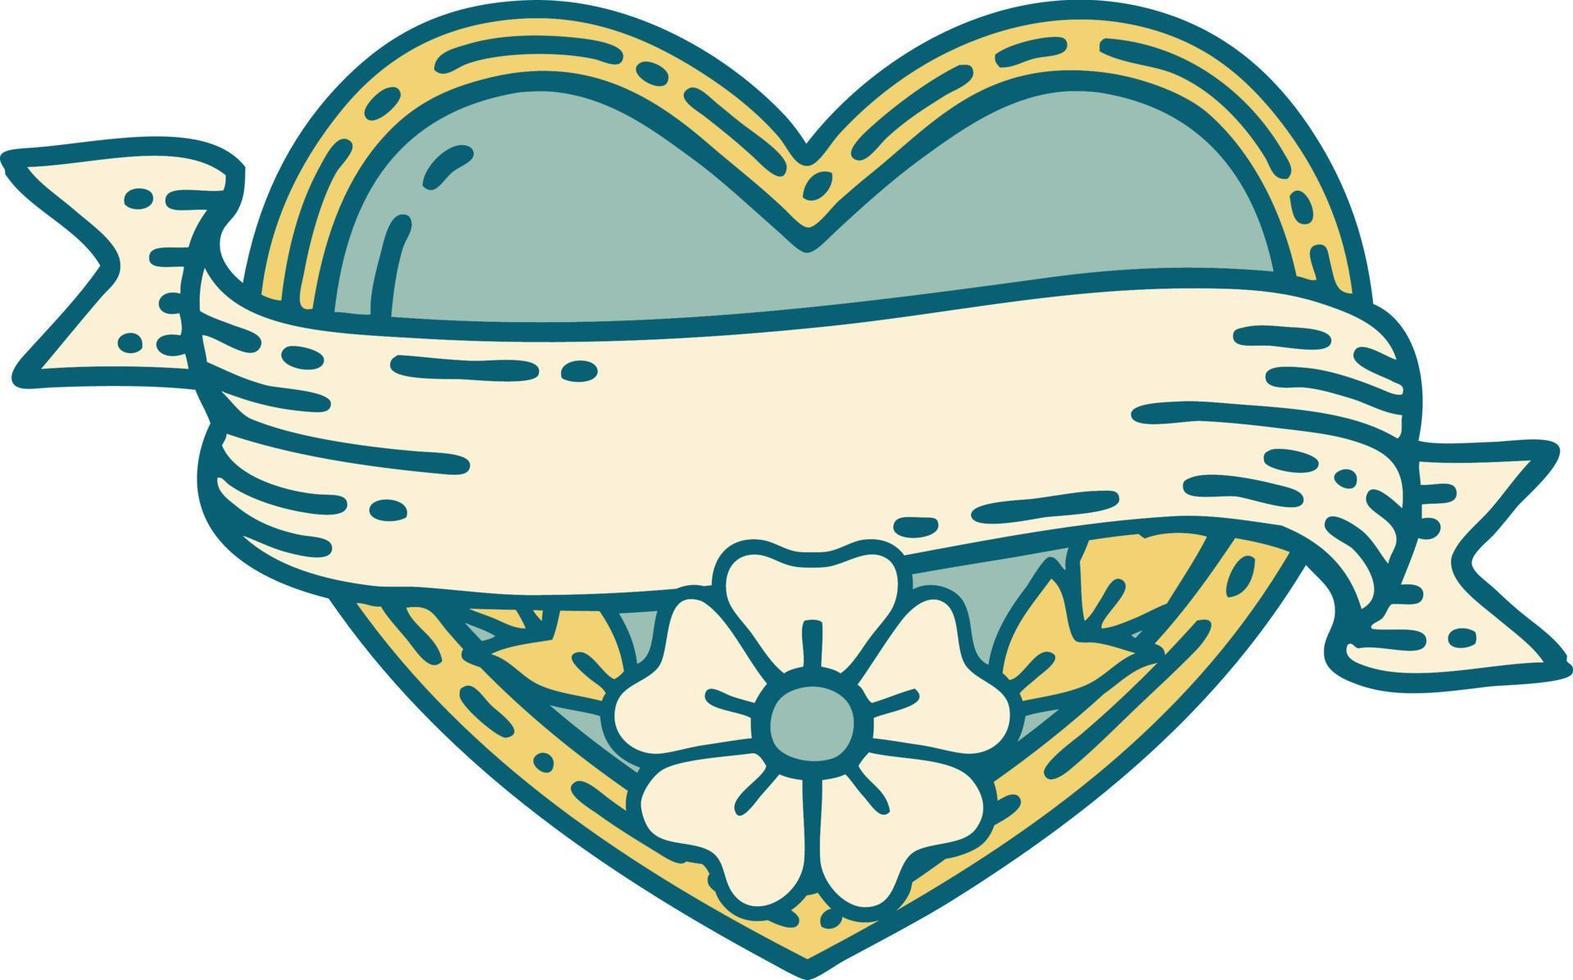 iconic tattoo style image of a heart and banner with flowers vector